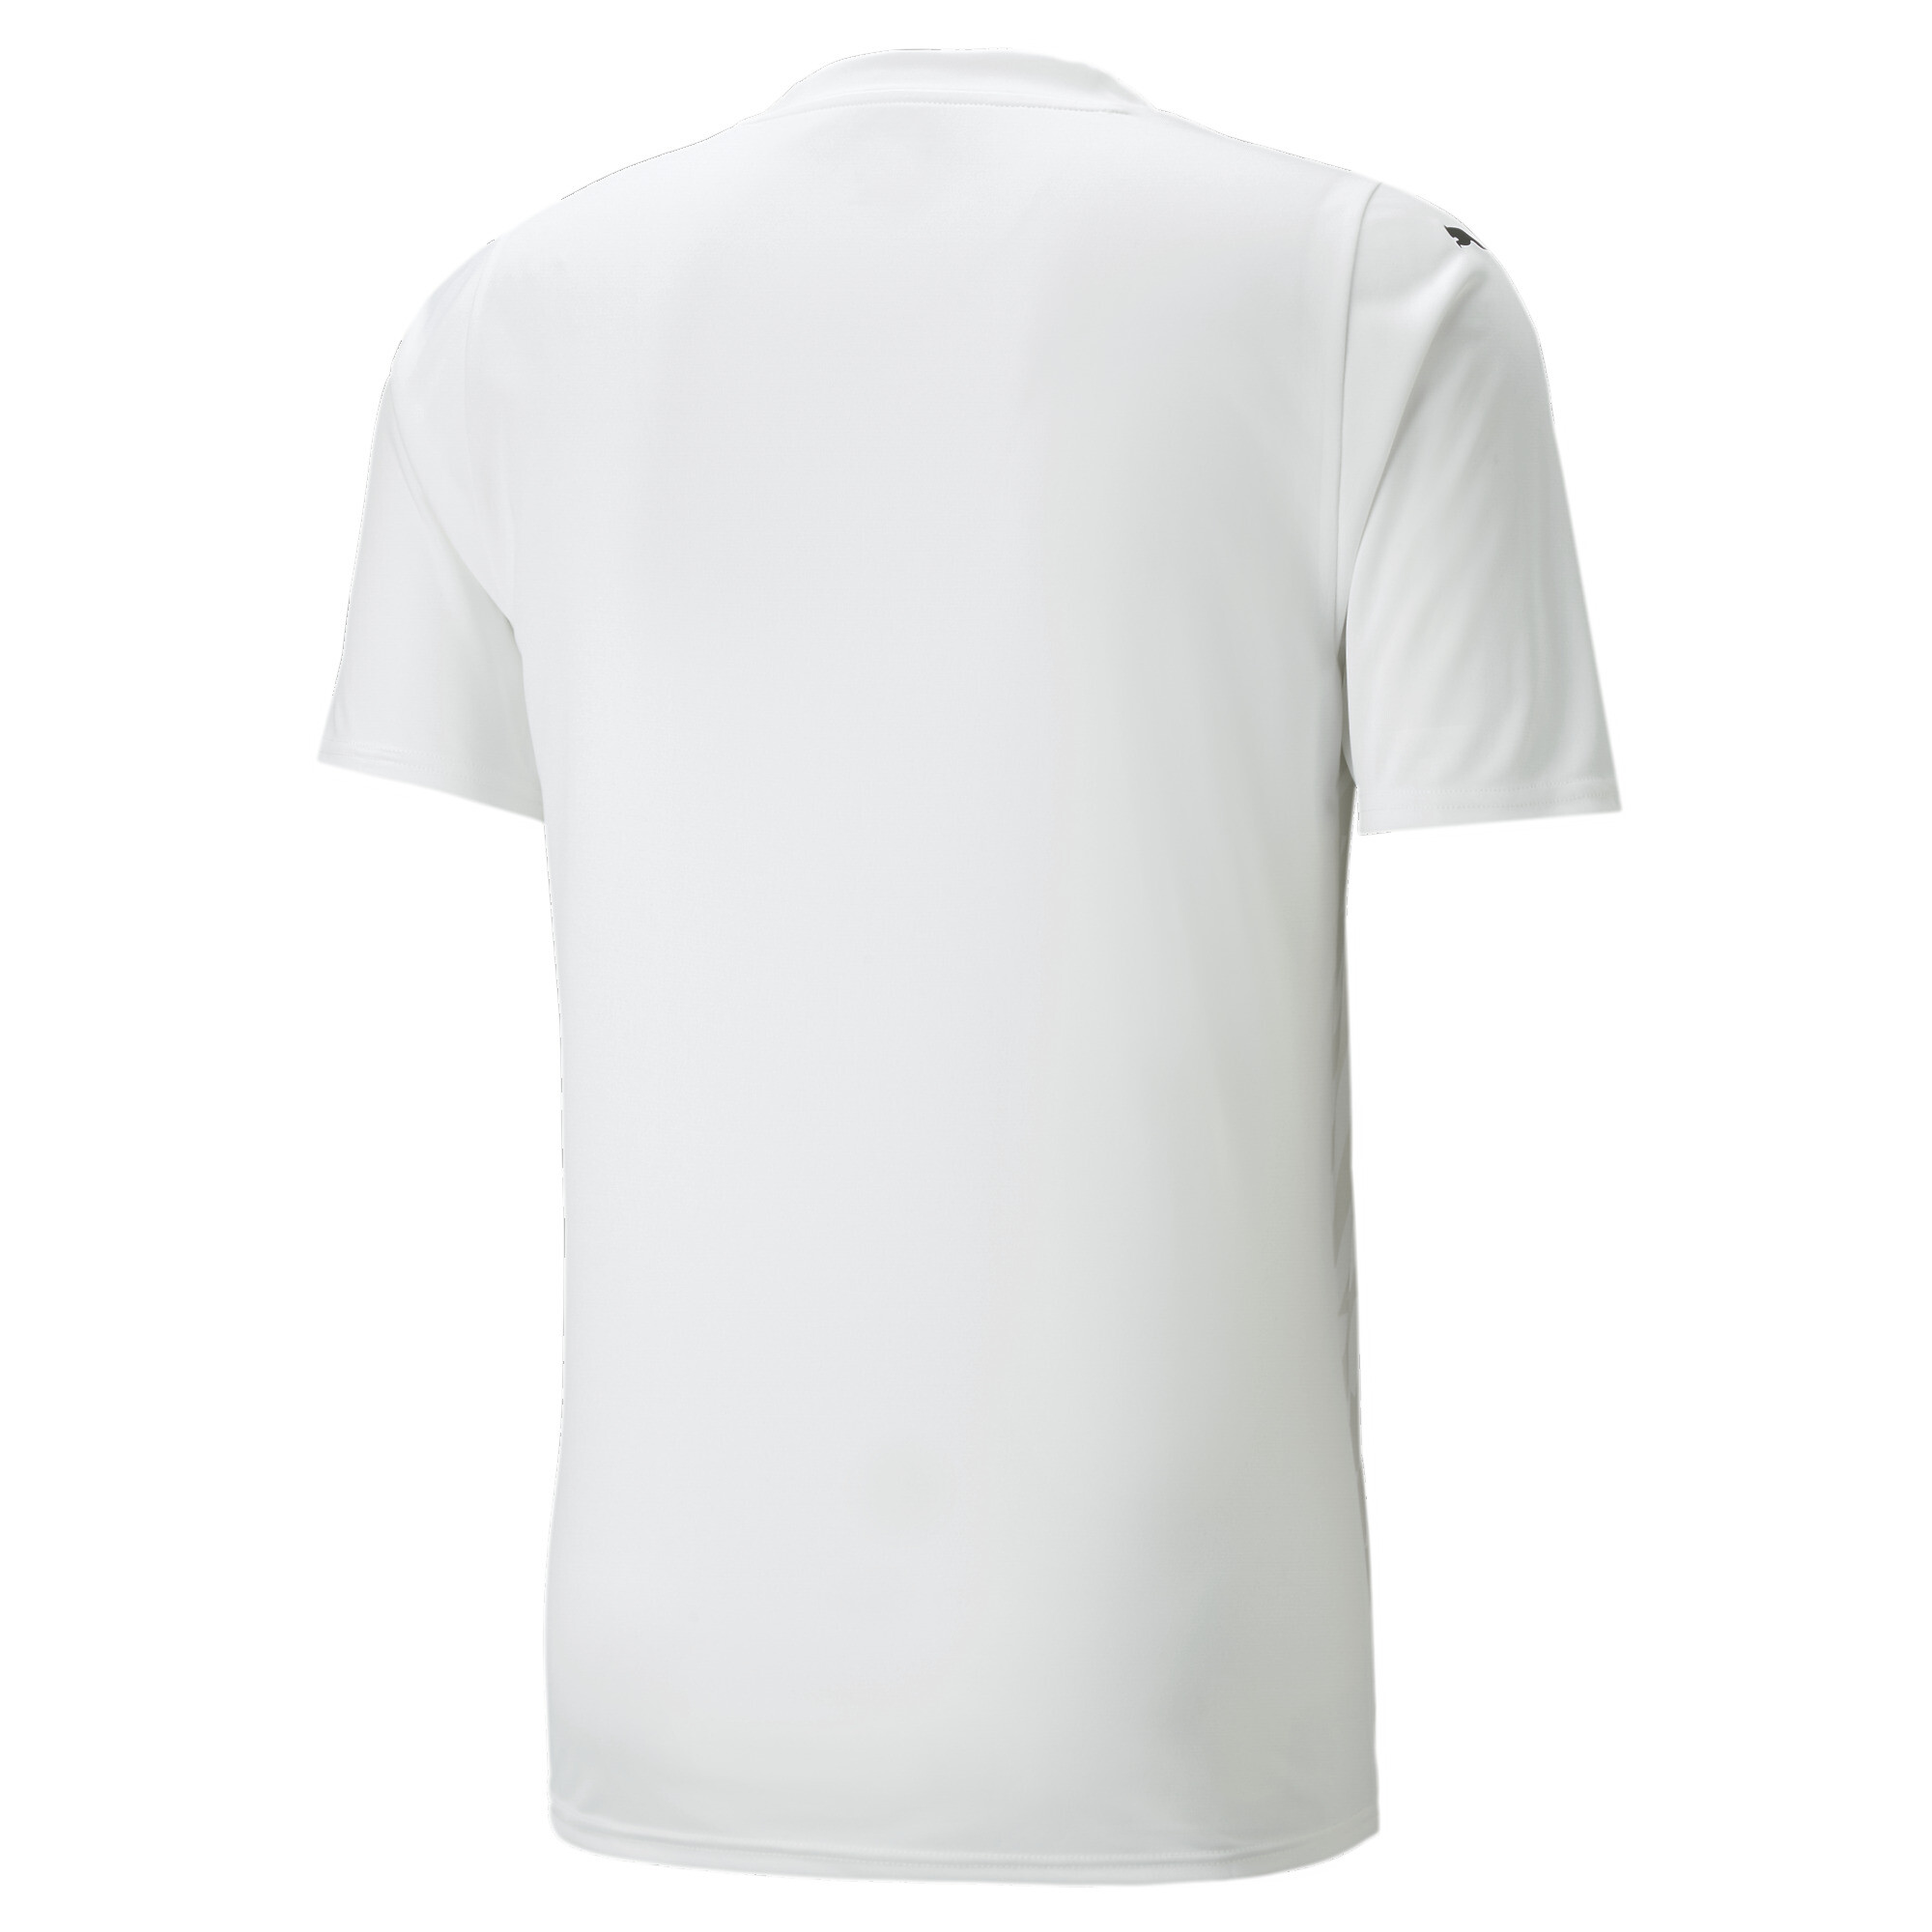 Men's Puma Team ULTIMATE Football Jersey, White, Size 3XL, Clothing